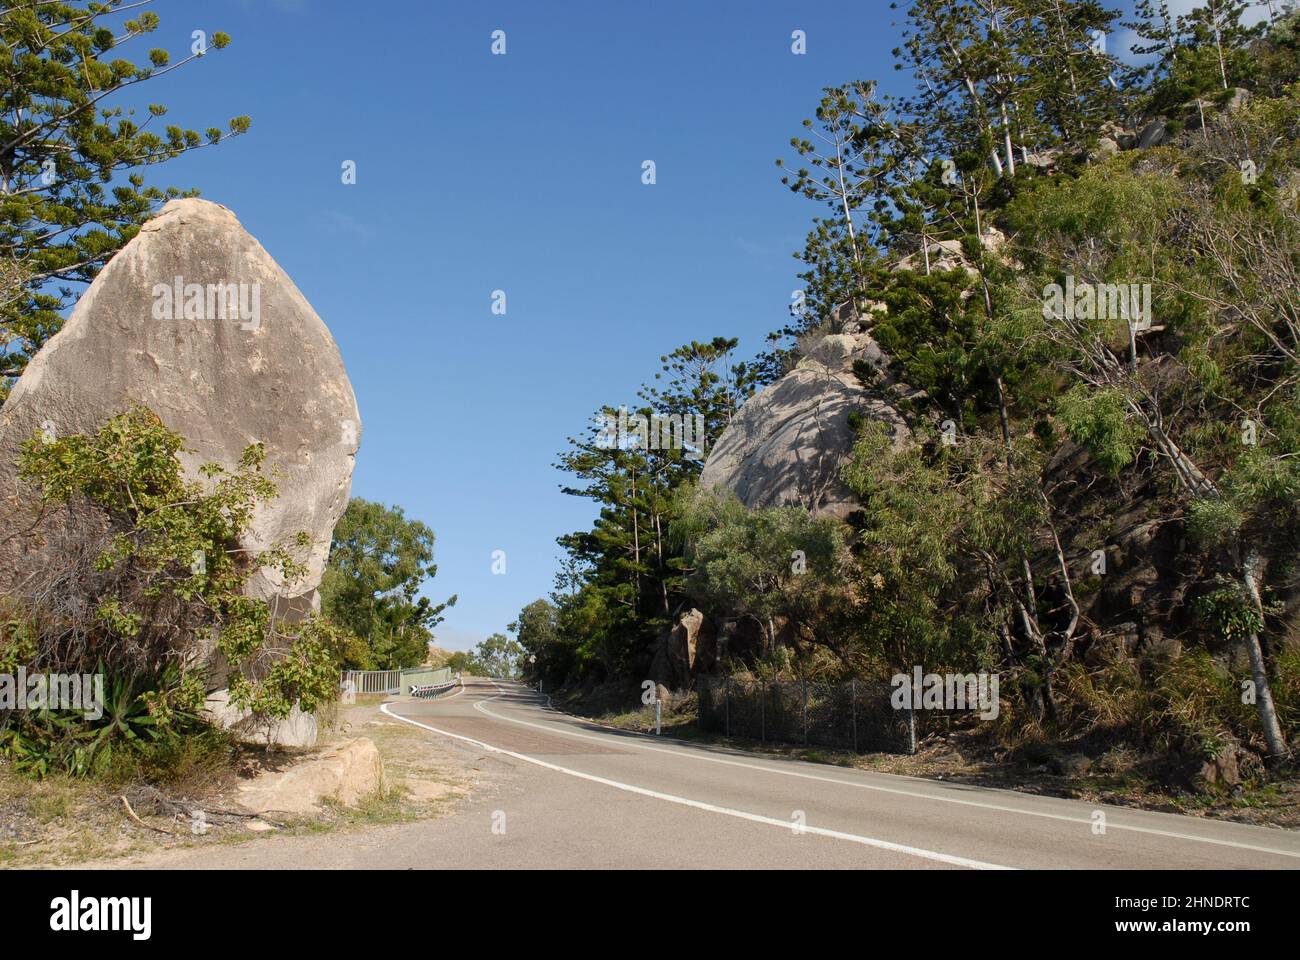 The road on Magnetic Island, with granite boulders, Hoop pines and eucalyptus trees, Queensland, Australia Stock Photo